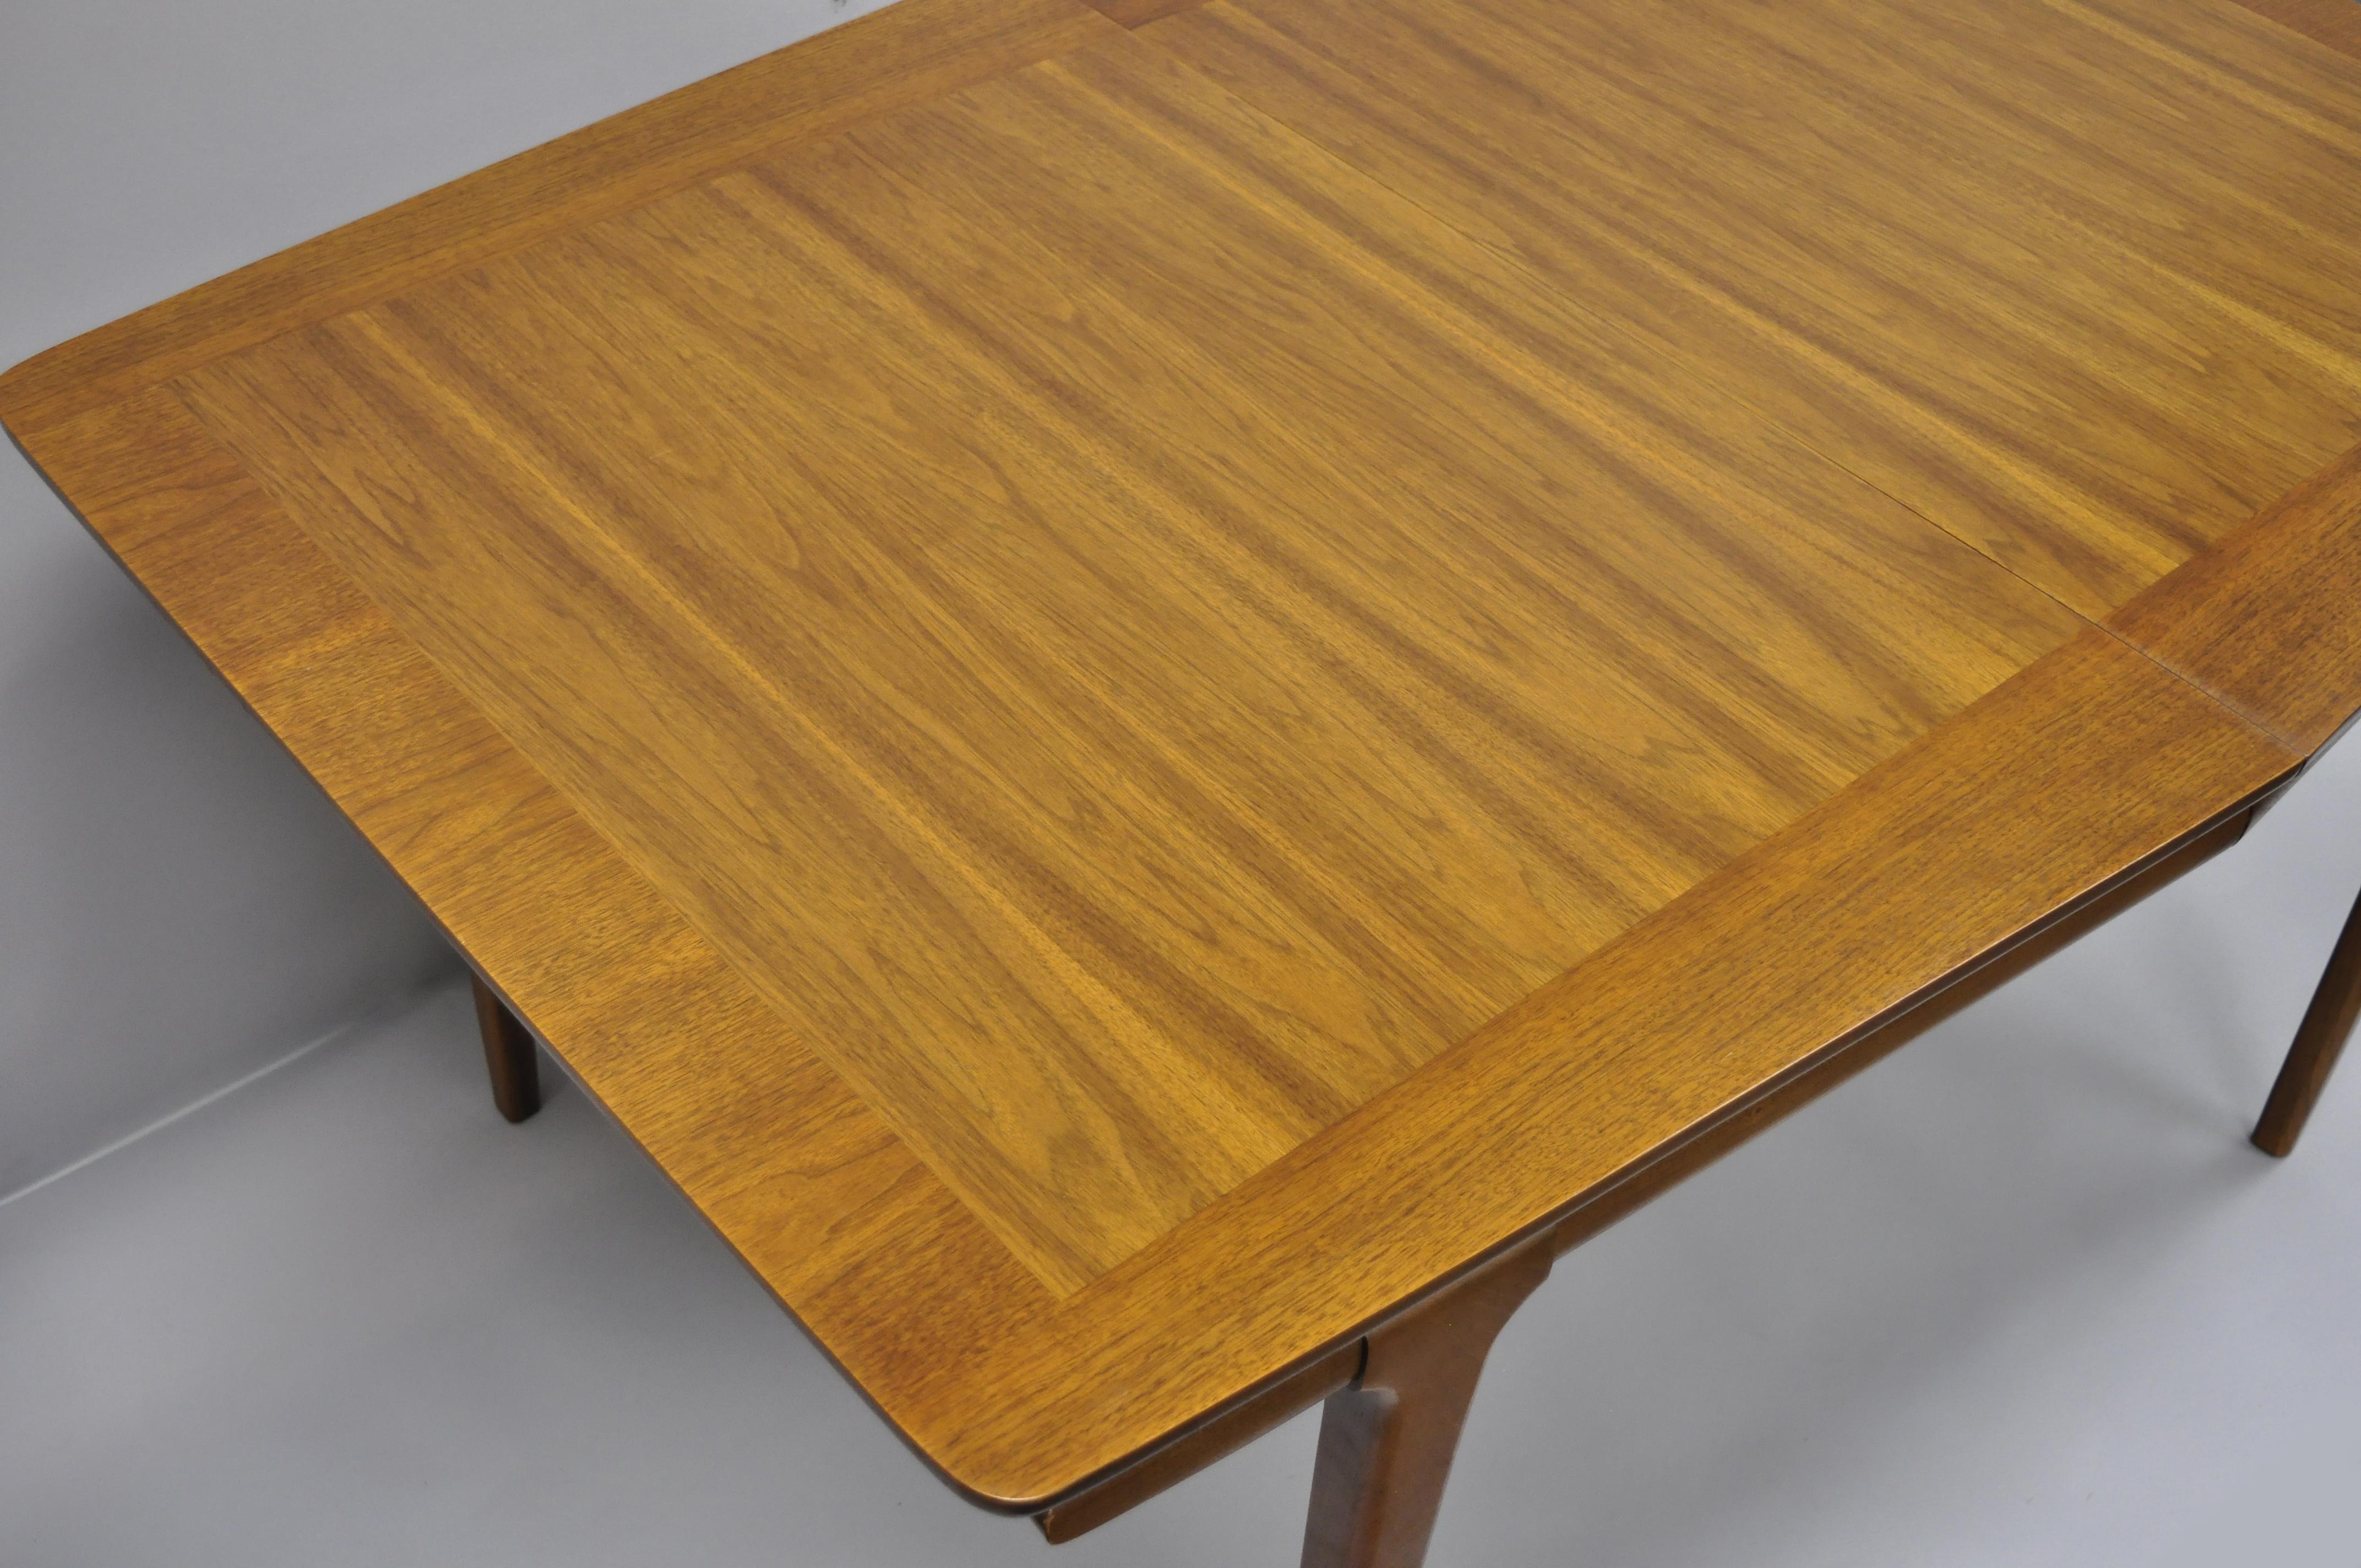 American Mid-Century Modern Danish Walnut Sculpted Edge Dining Table with 1 Leaf